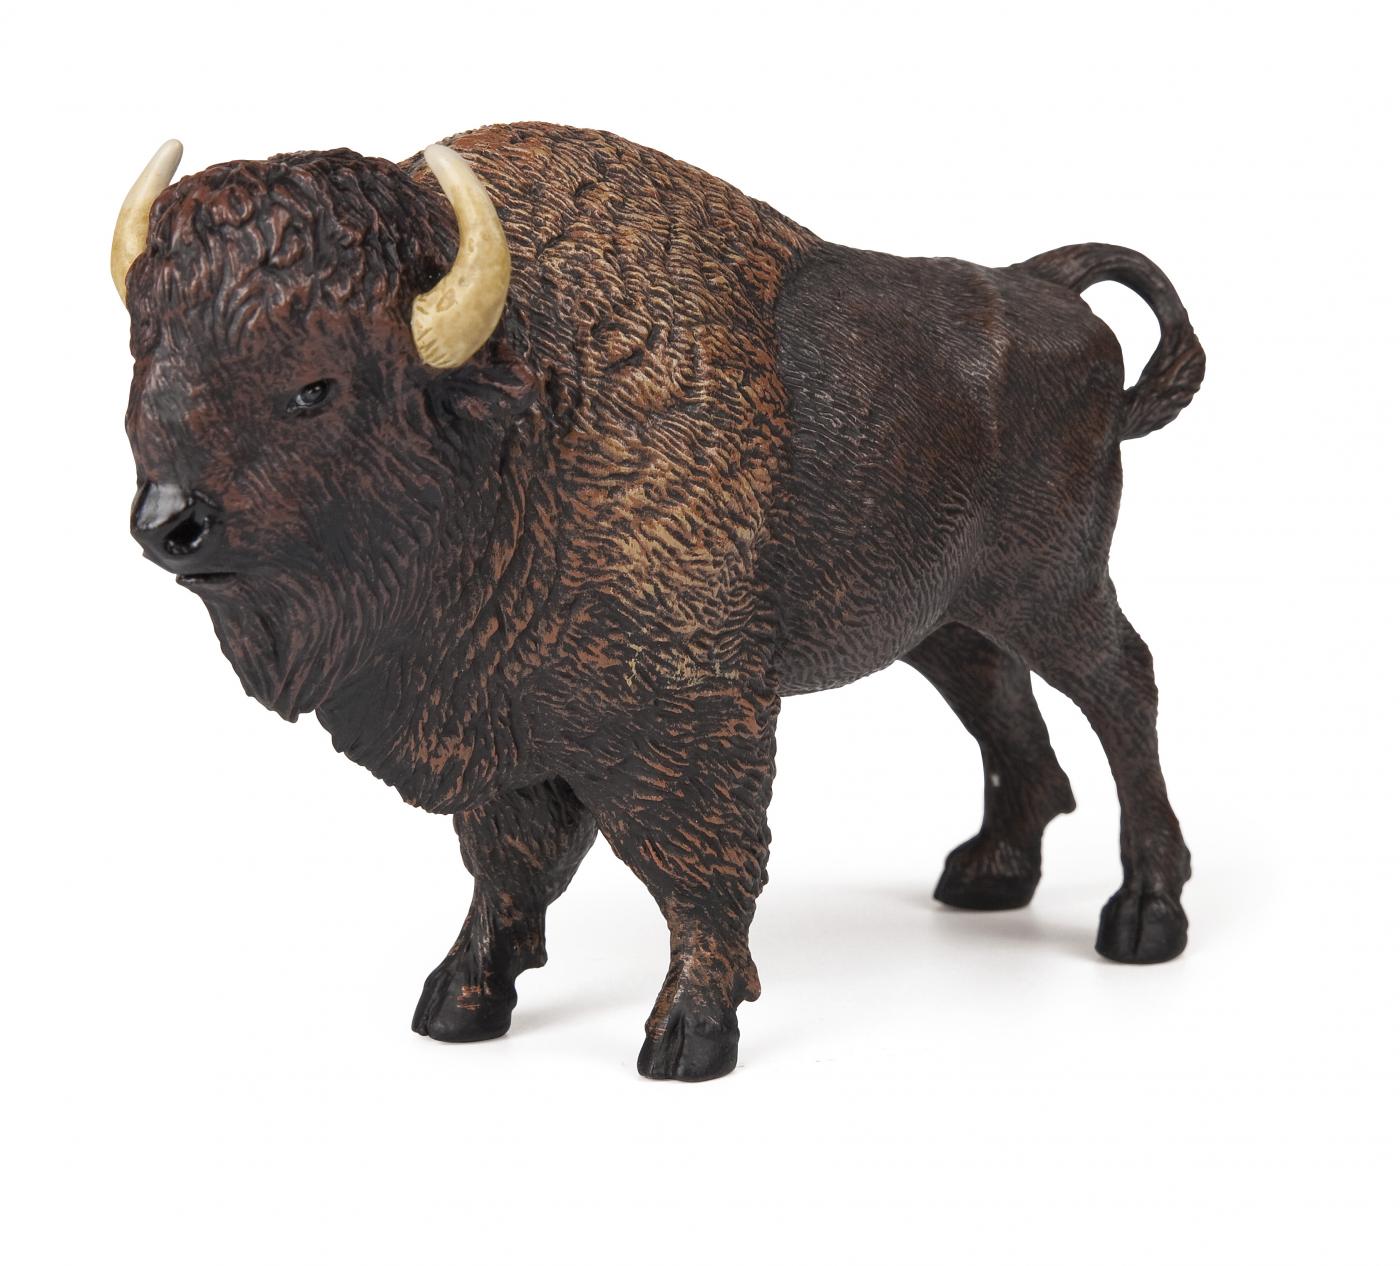 Papo 50119 American Bison - animal figures at 